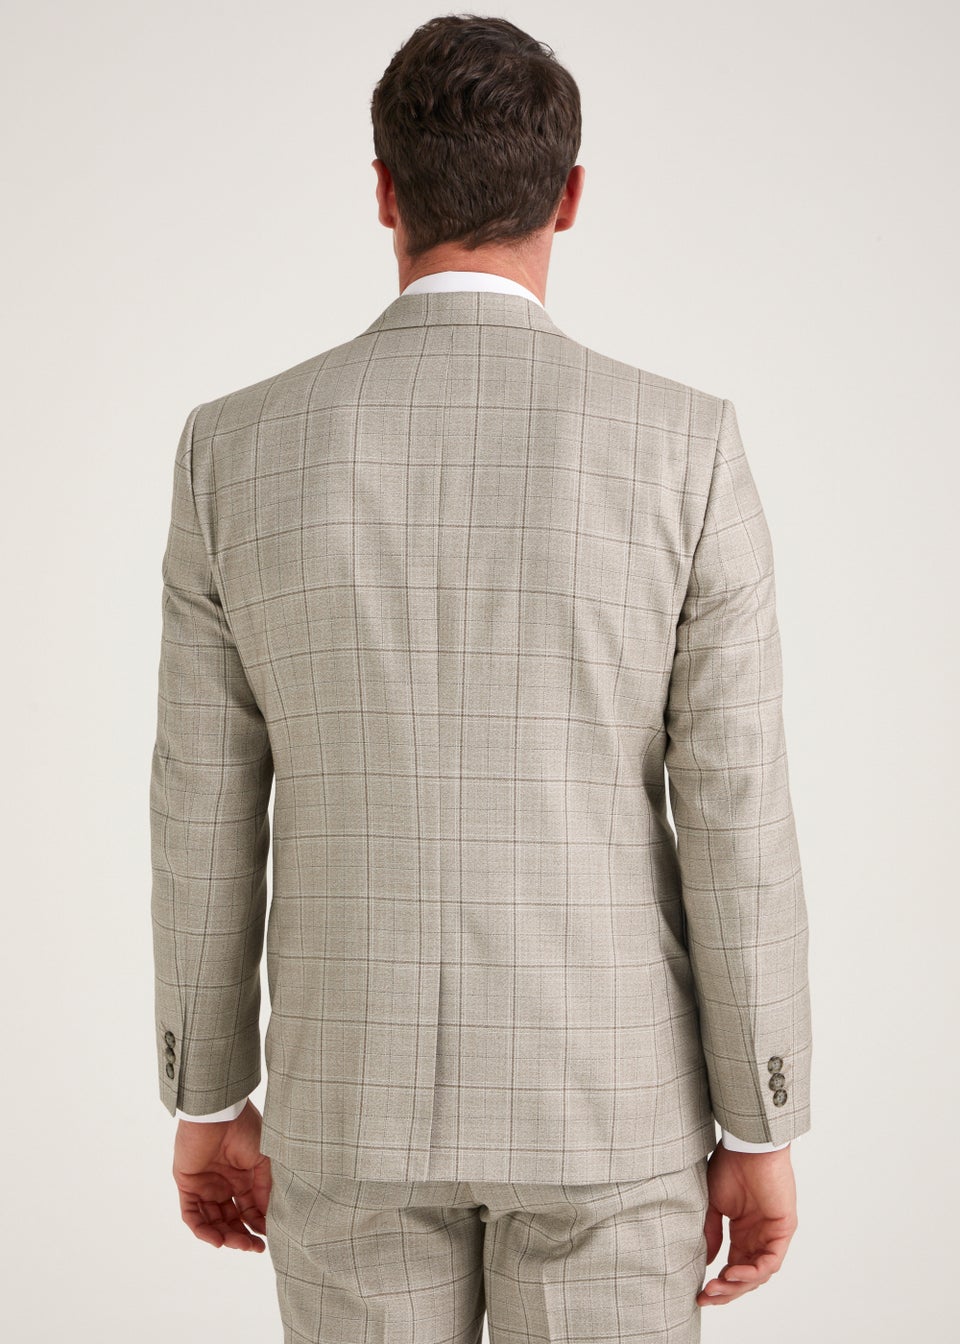 Taylor & Wright Hoffman Brown Tailored Fit Suit Jacket - Matalan